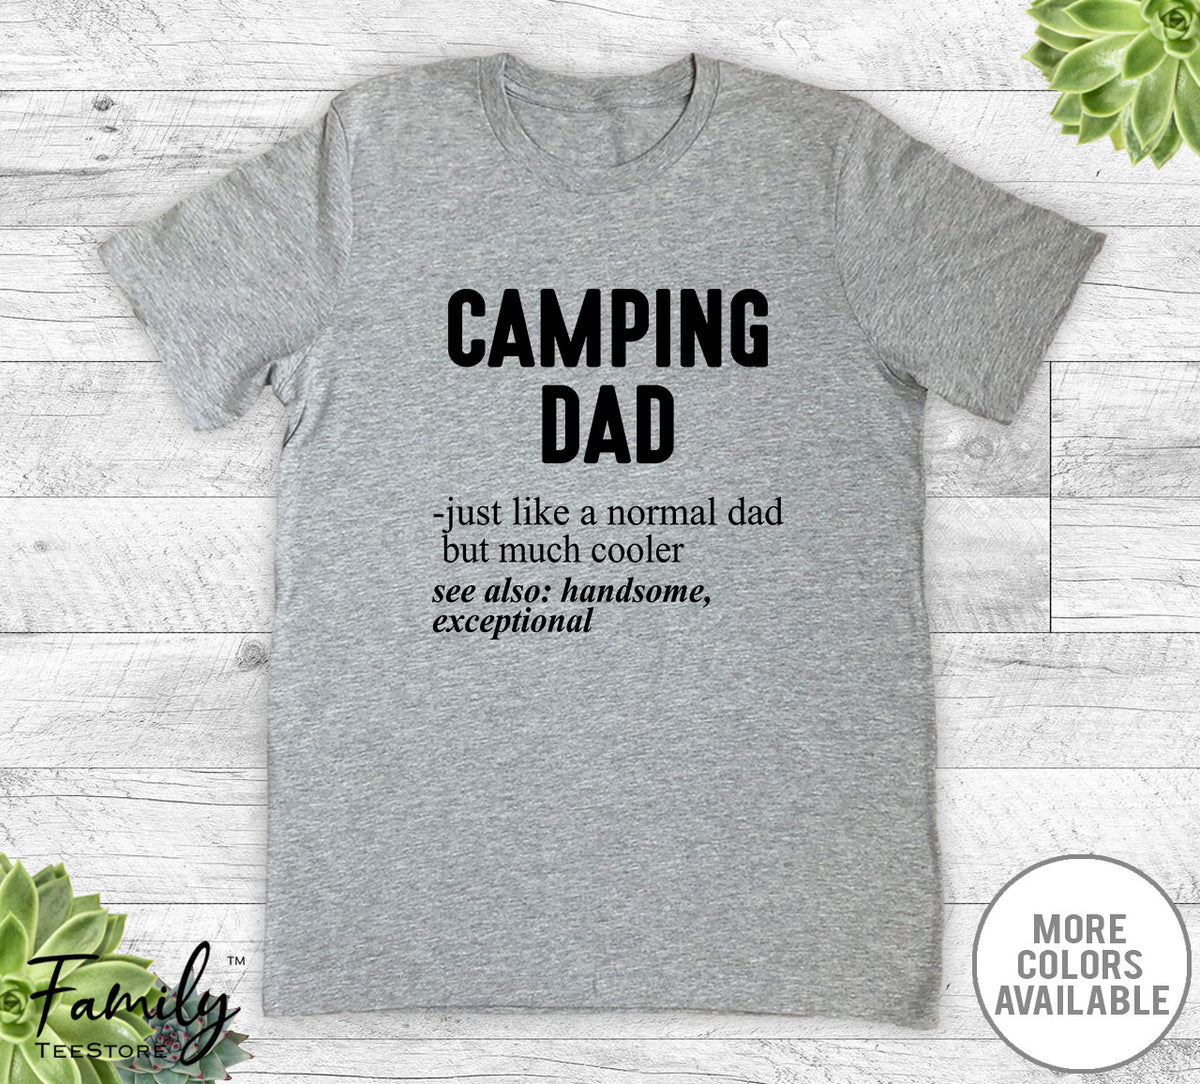 Camping Dad Just Like A Normal Dad - Unisex T-shirt - Camping Shirt - Camping Dad Gift